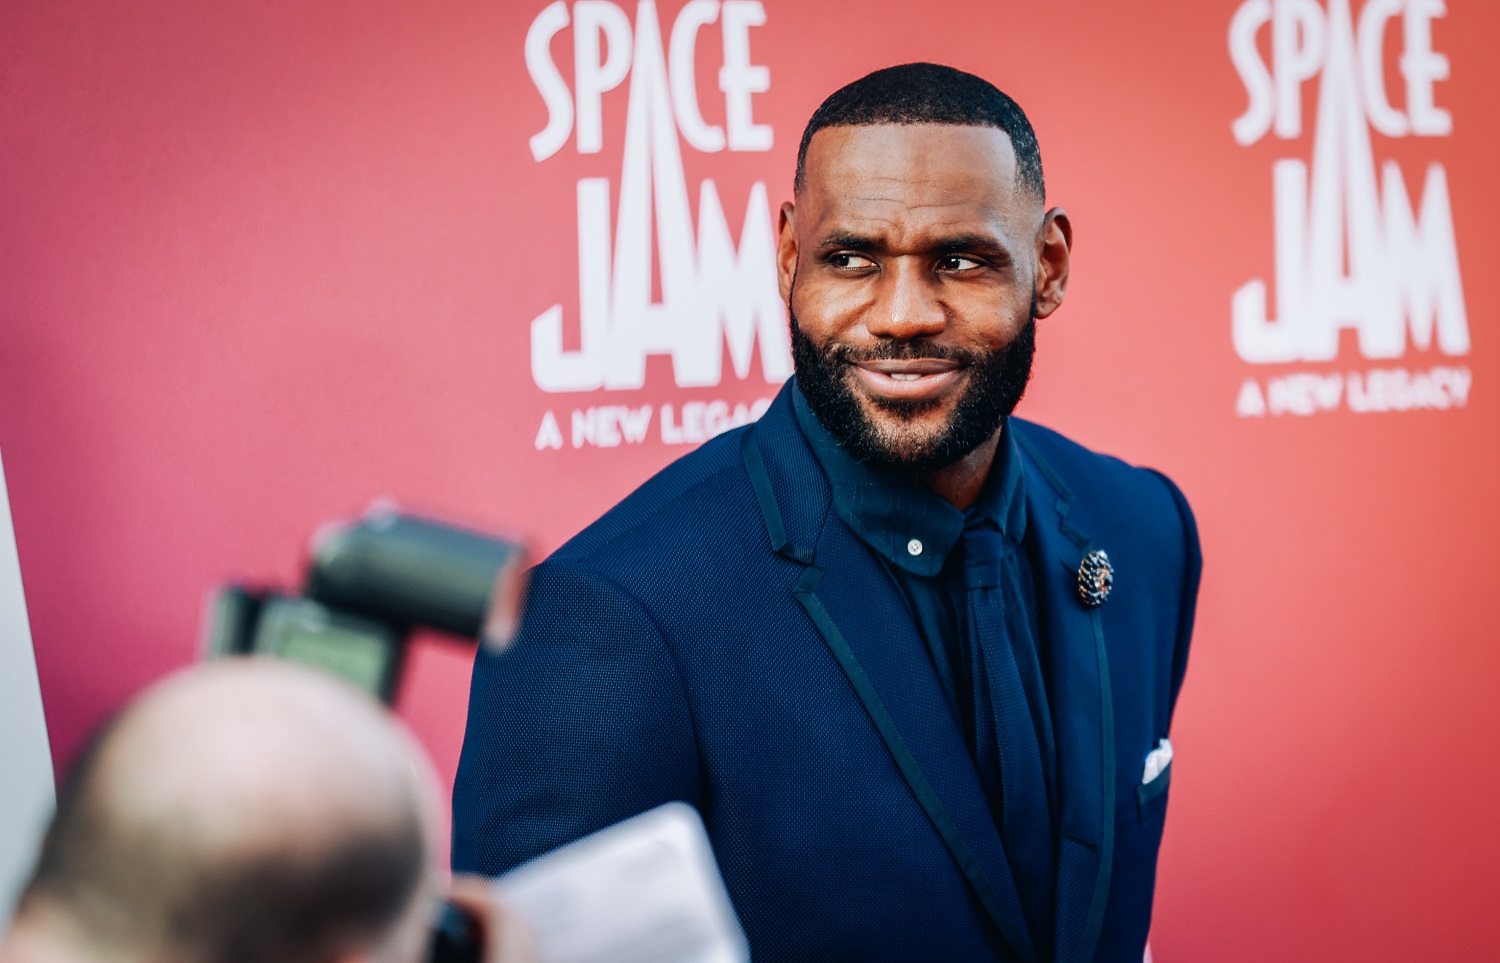 LeBron James attends the premiere of Warner Bros 'Space Jam: A New Legacy' in Los Angeles, California.